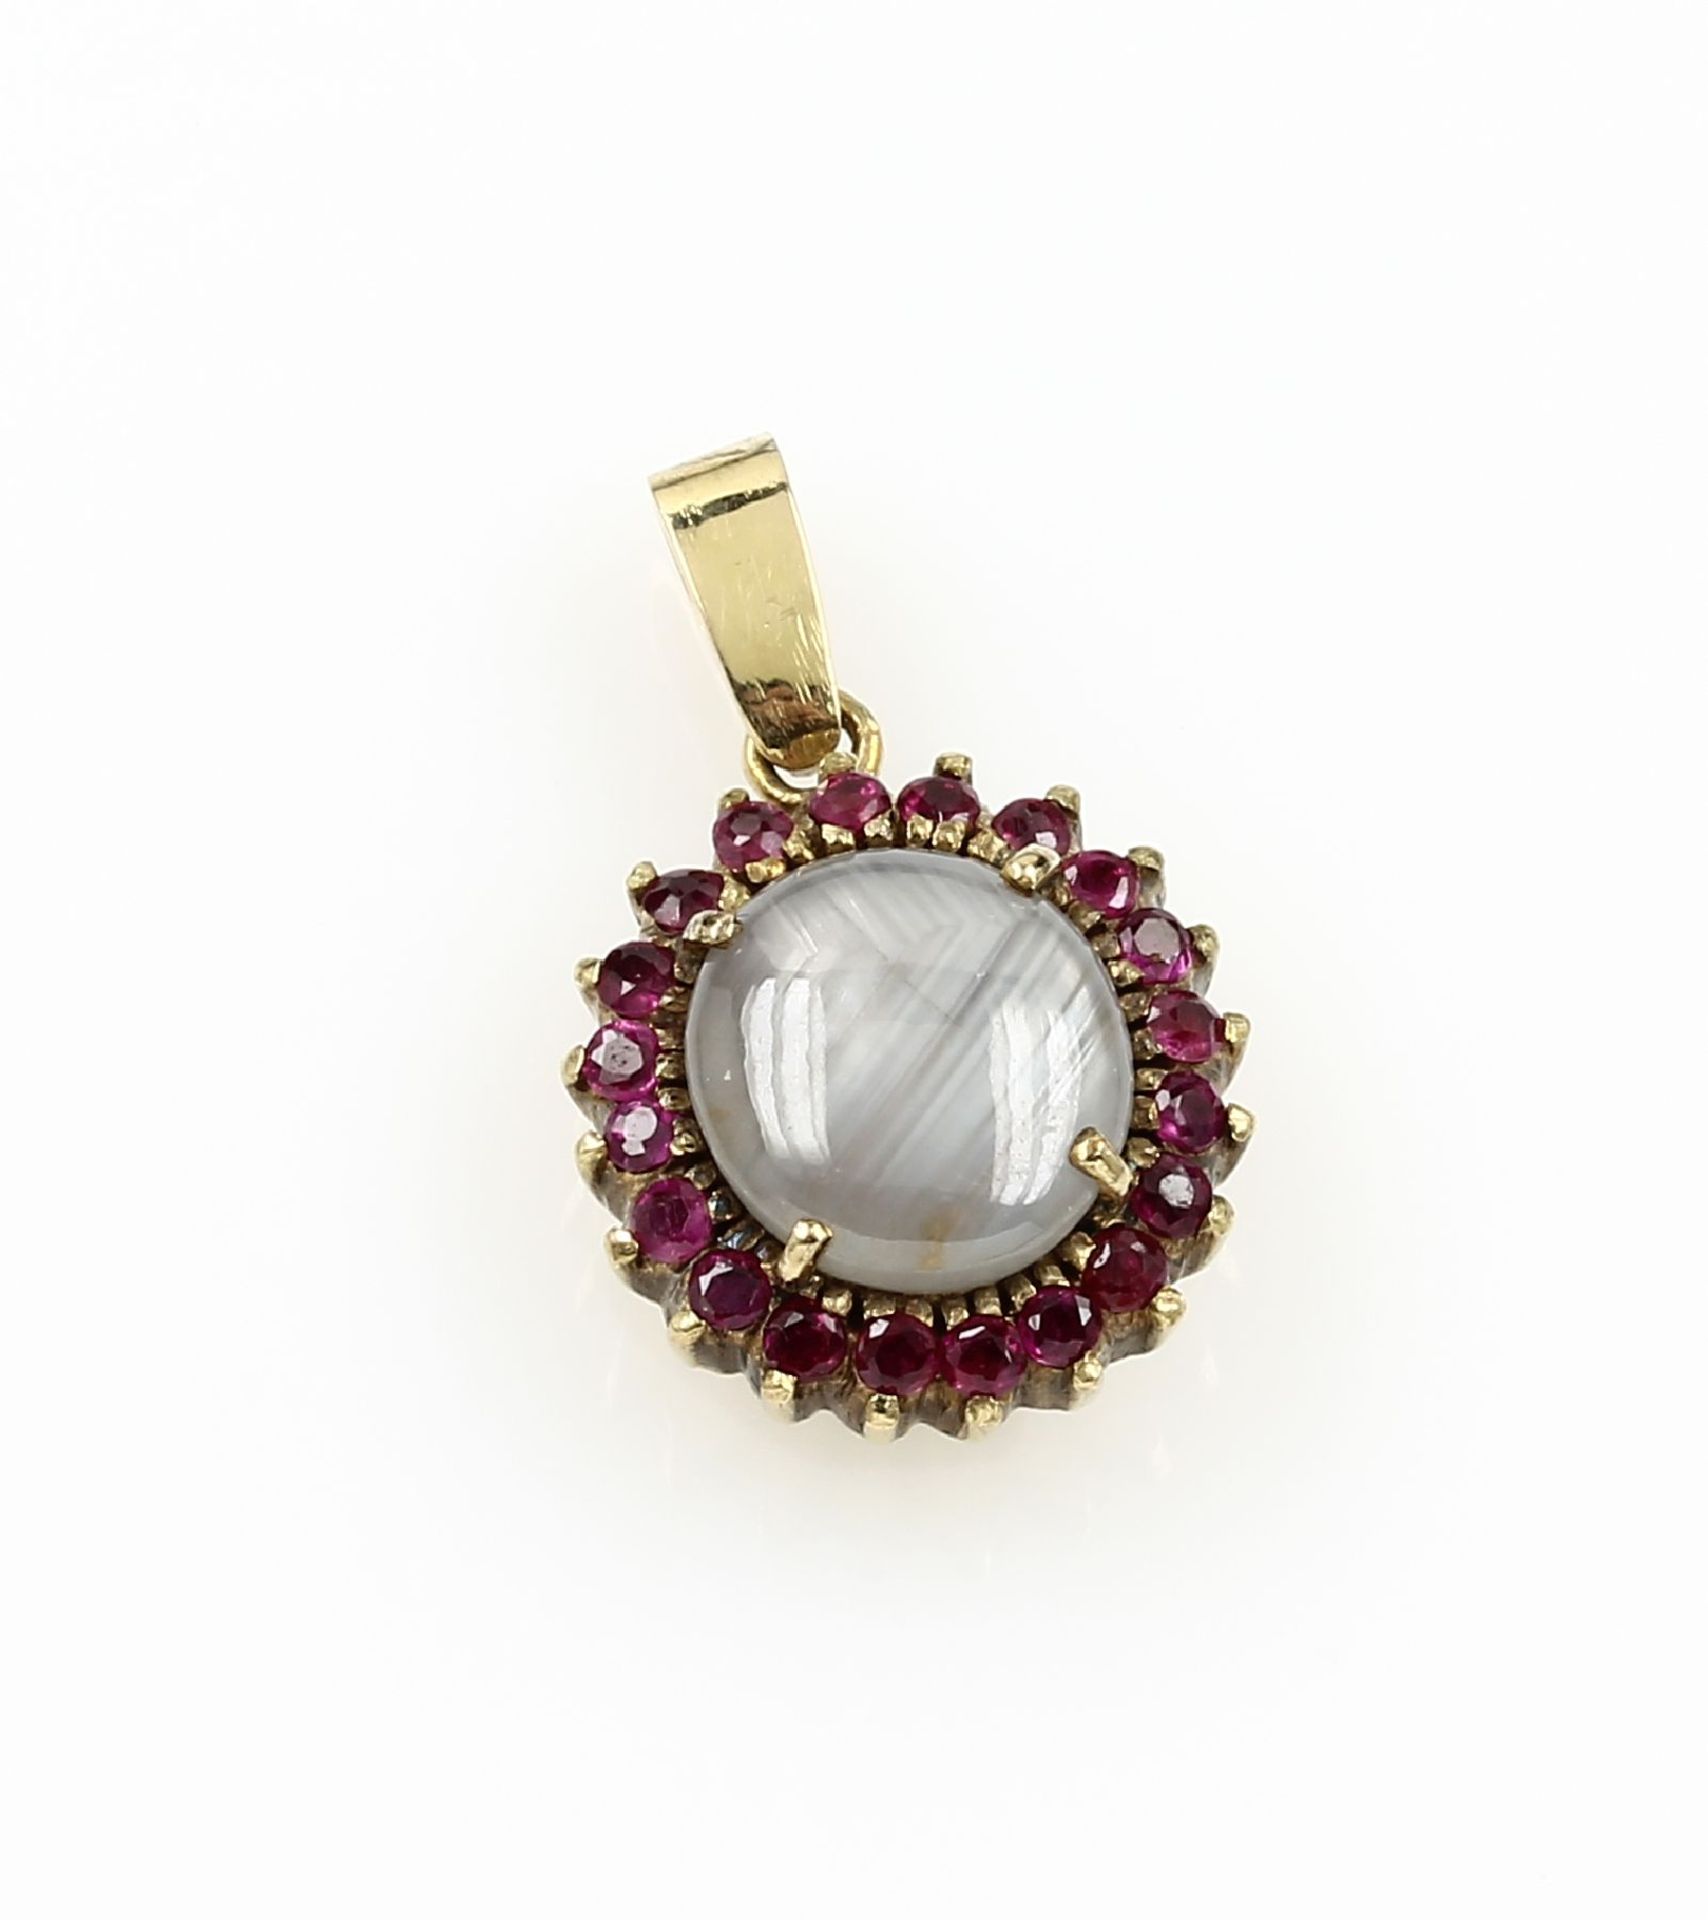 14 kt gold pendant with star sapphire and rubies , YG 585/000, oval star sapphire- cabochon